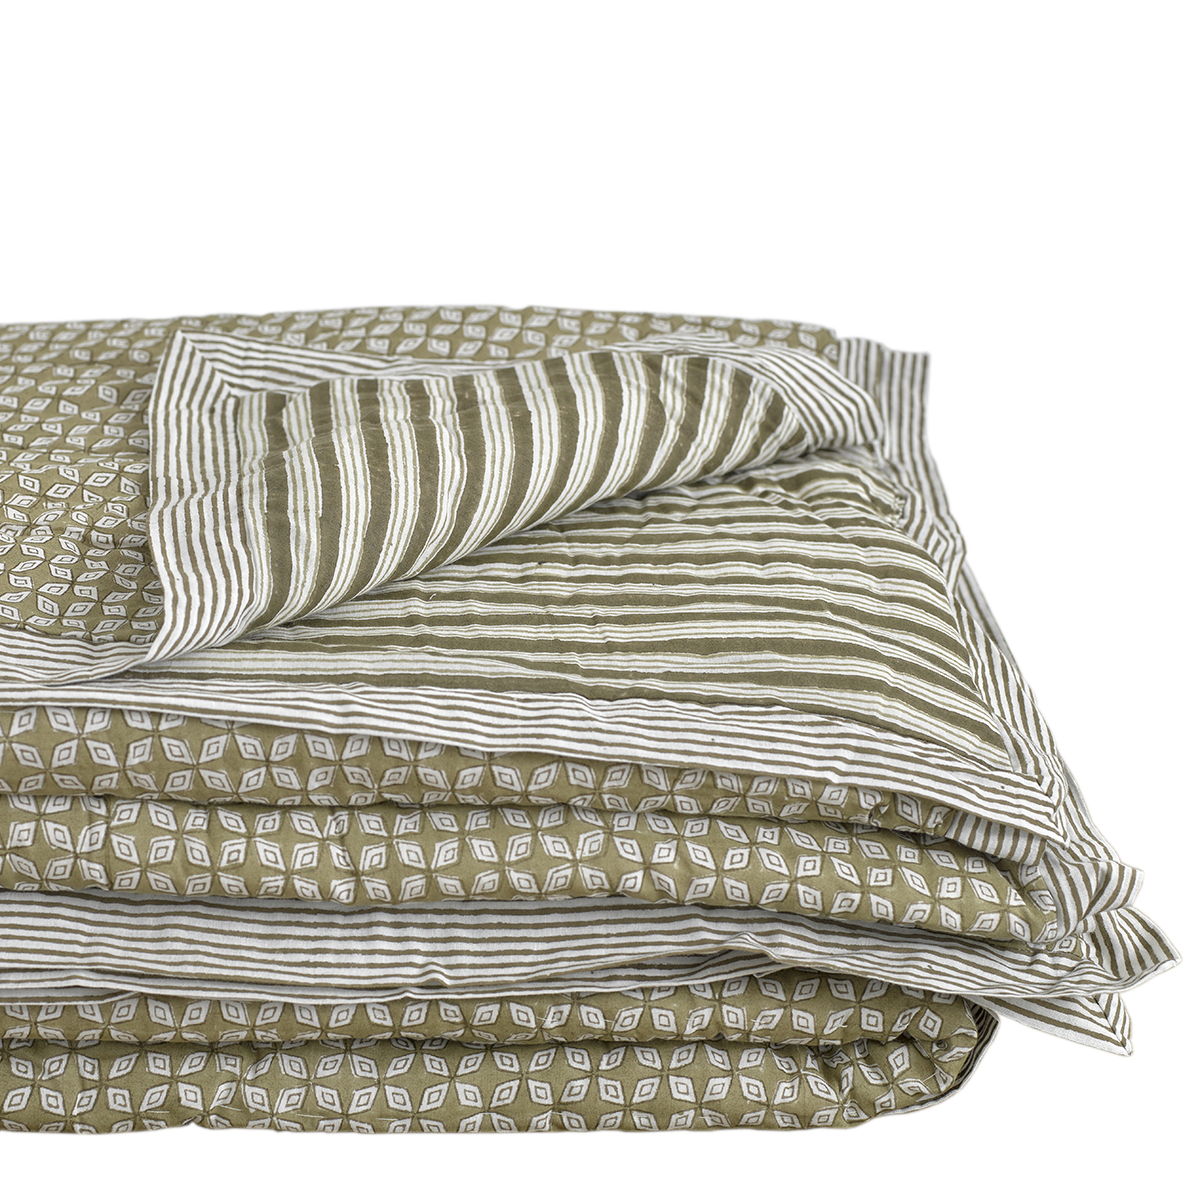 Mustard Stripes and Reversible Pattern Bedspread